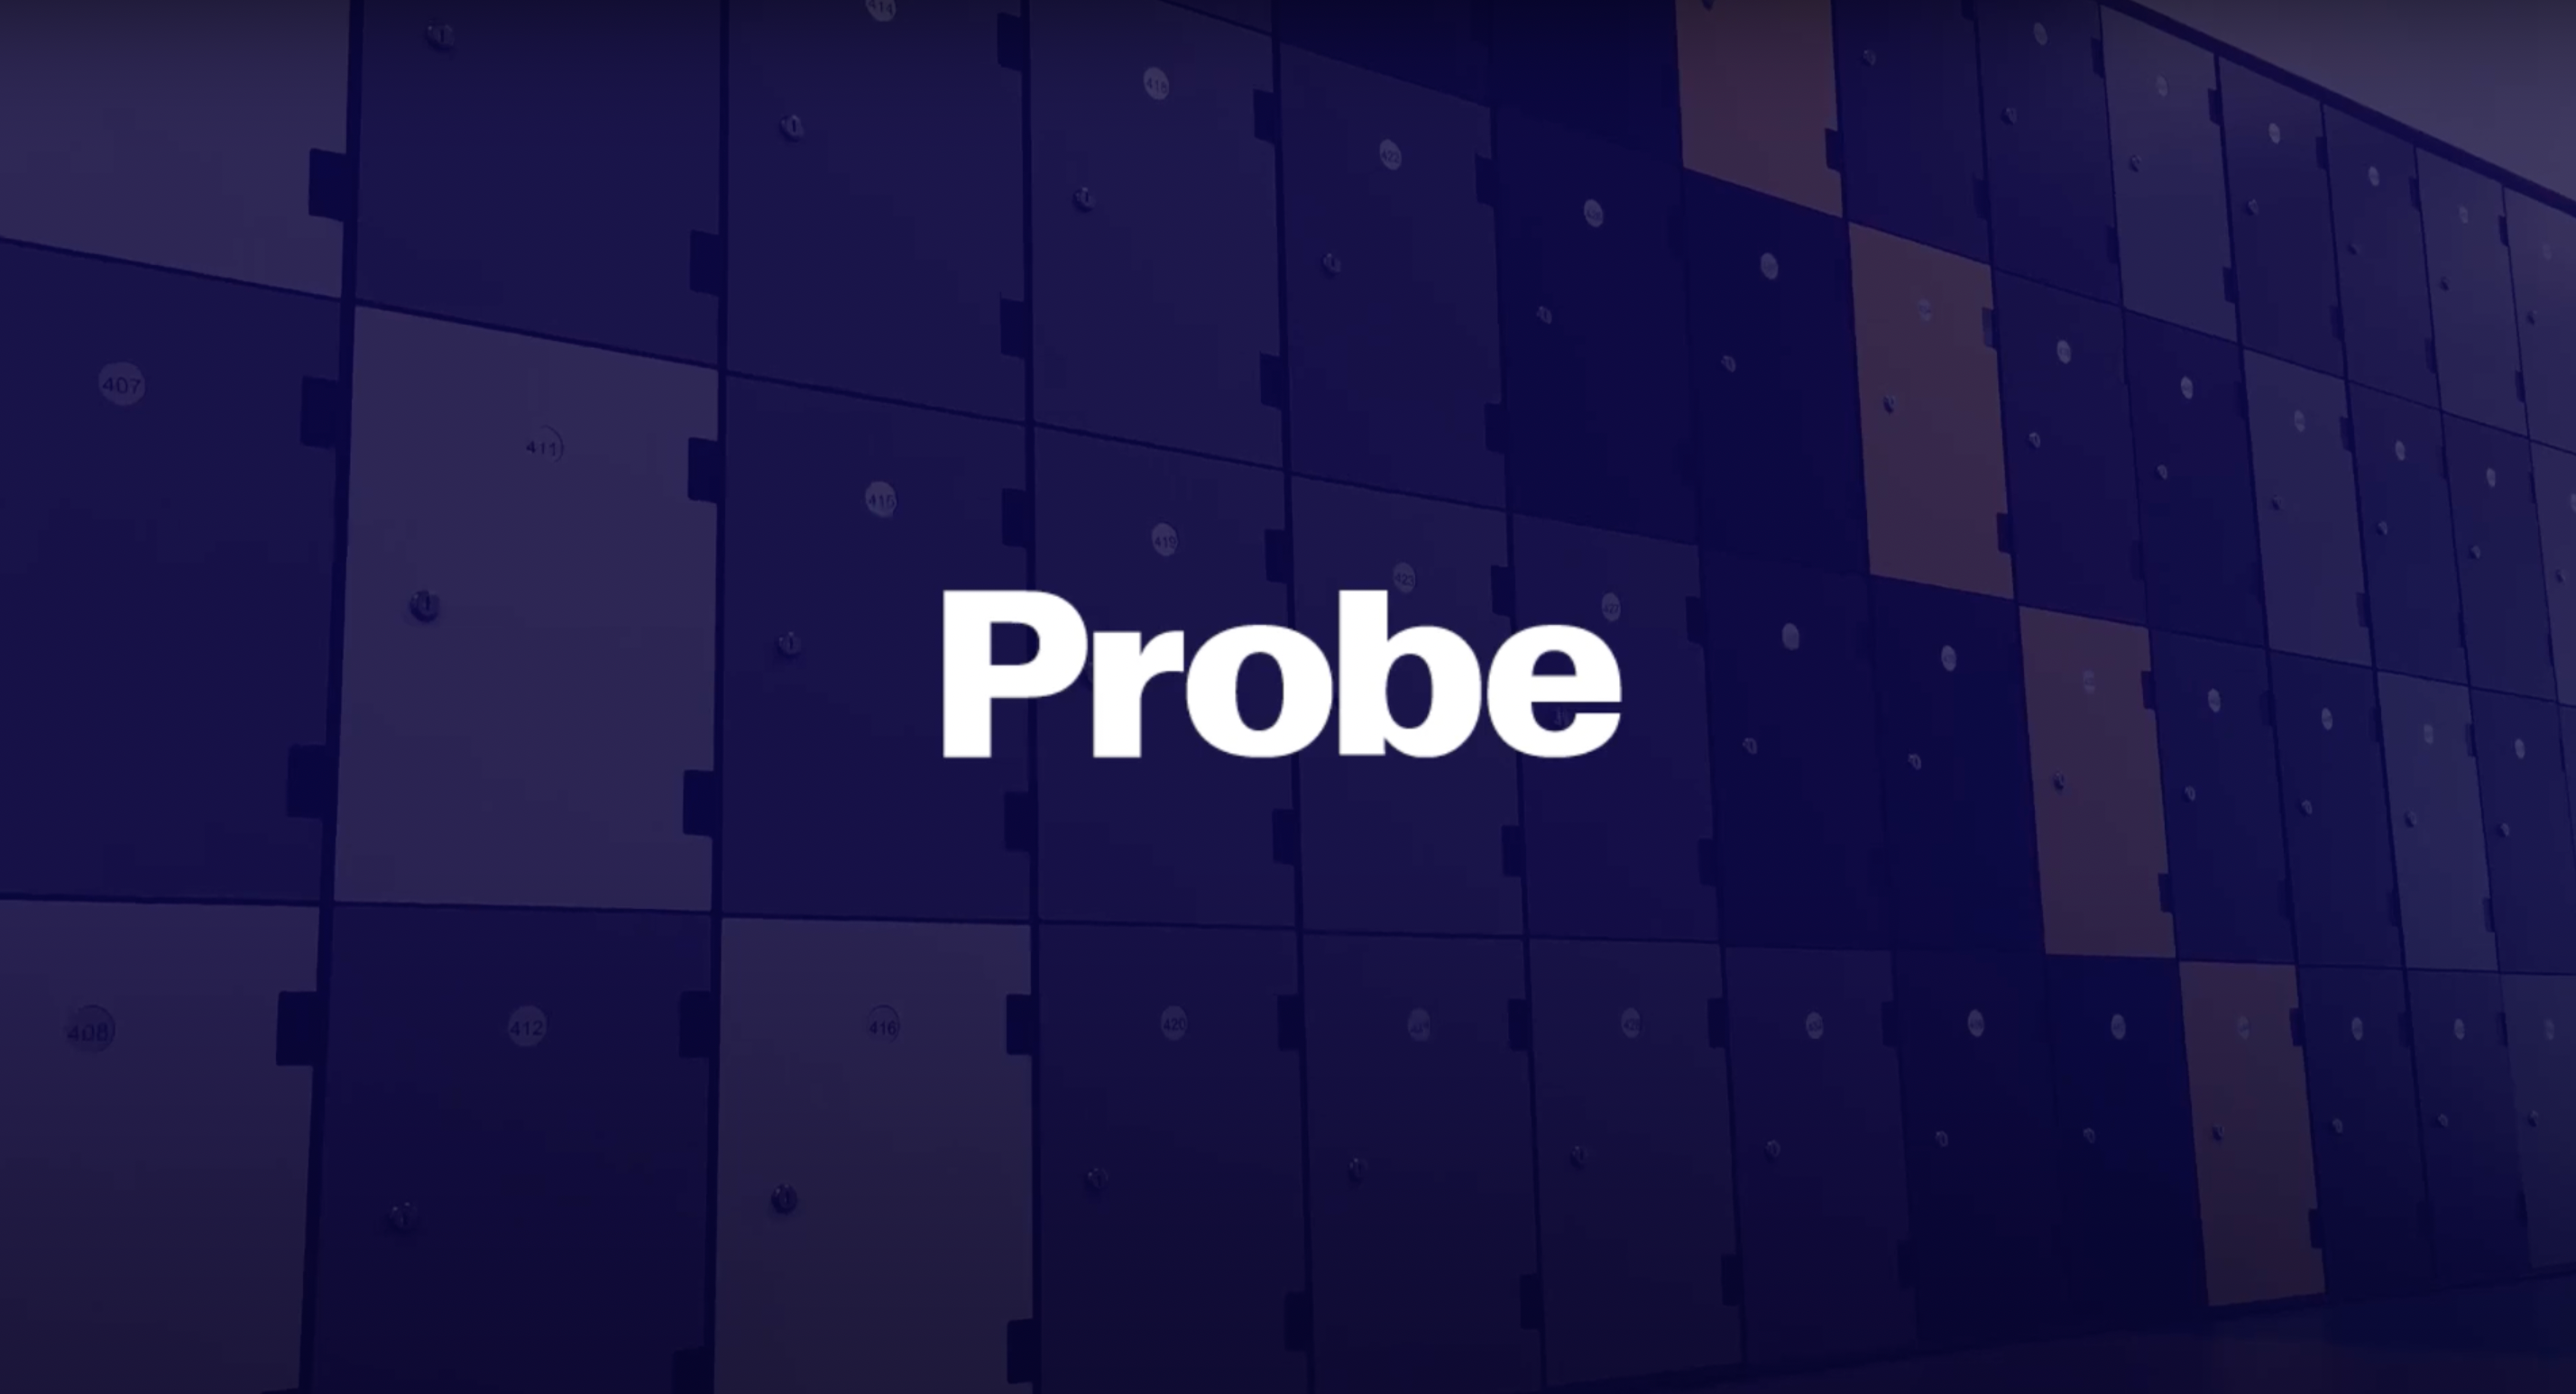 Probe: A Trusted Whittan Brand